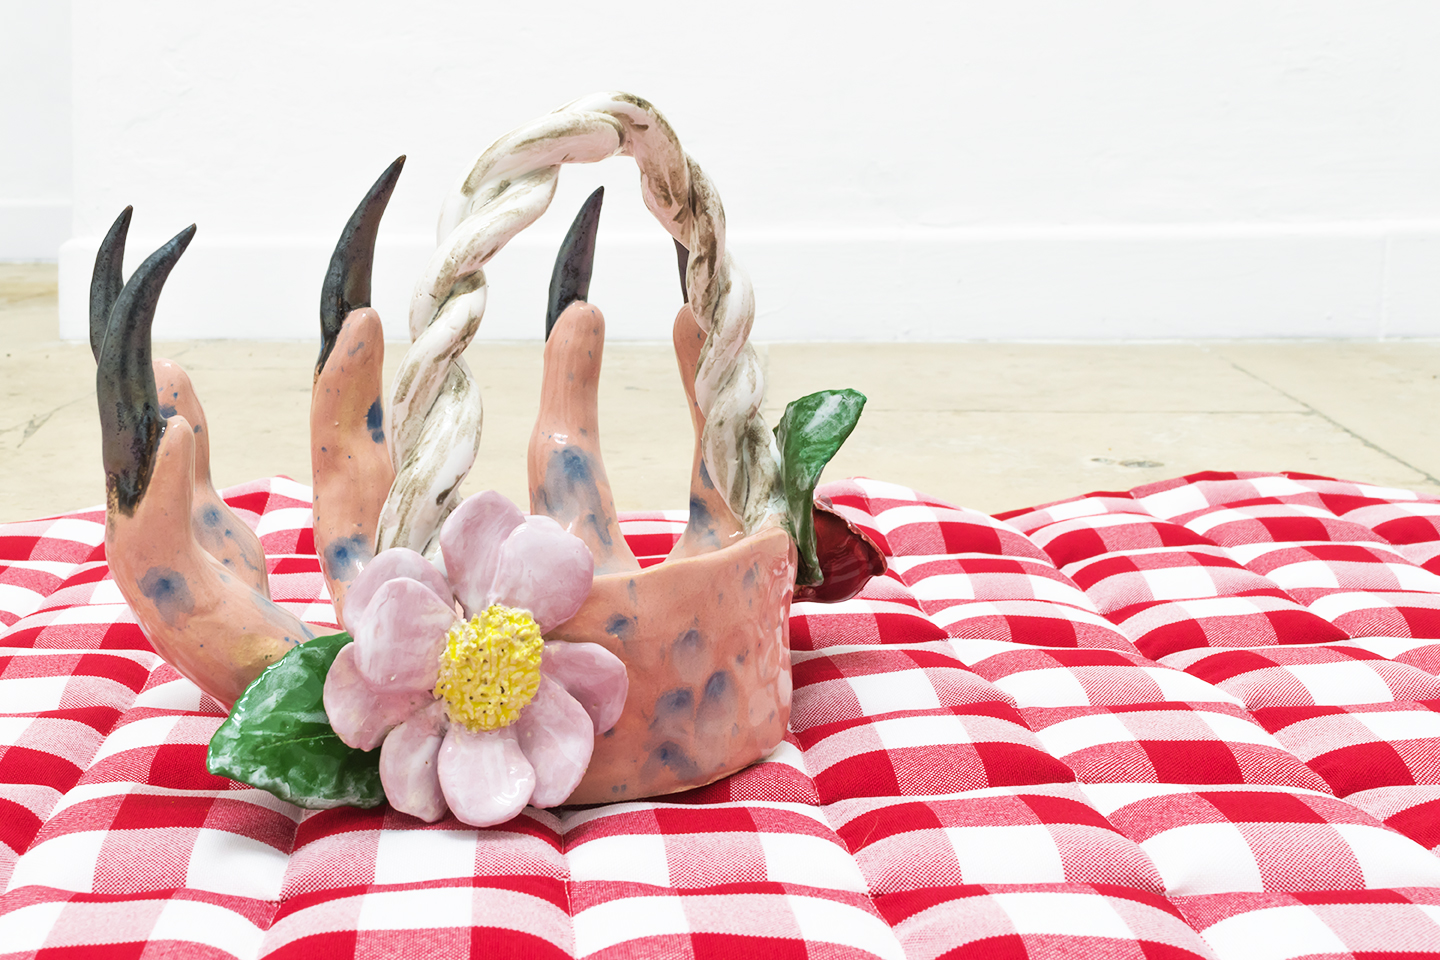 Naomi Gilon, Picnic with the wolf, 2019, glazed ceramics and wildflowers on padded tablecloth. 100x70x30 cm (detail)